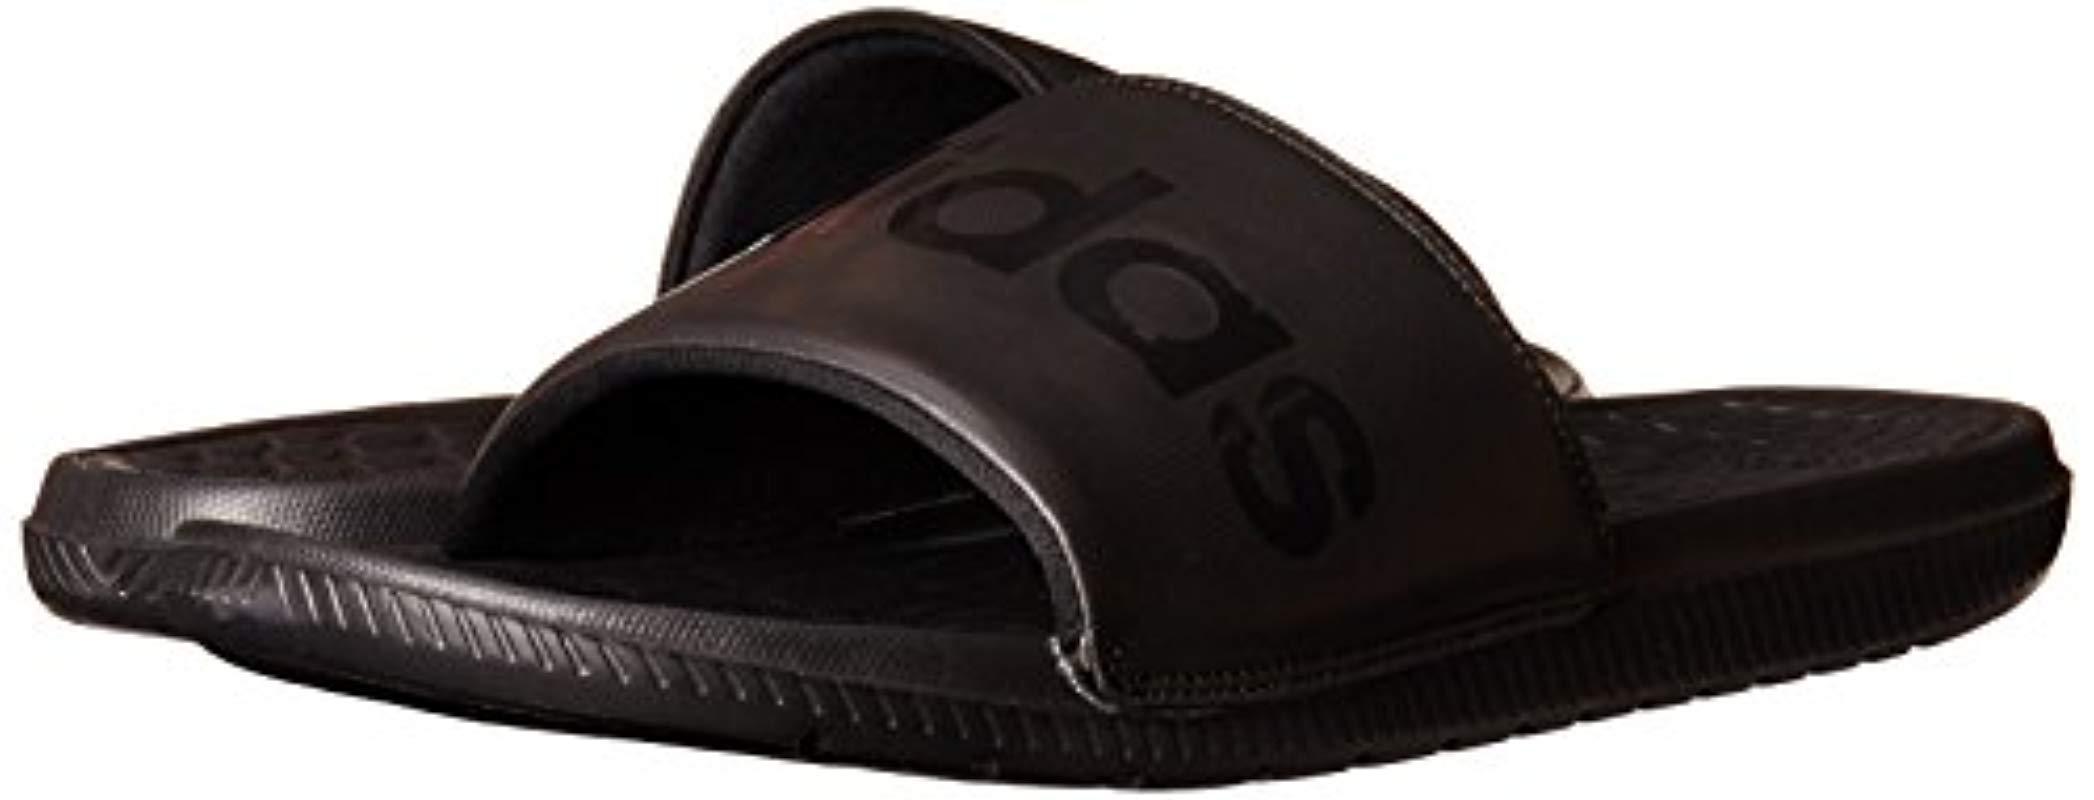 adidas Synthetic Performance Voloomix Athletic Sandal in Black/Black  (Black) for Men - Lyst